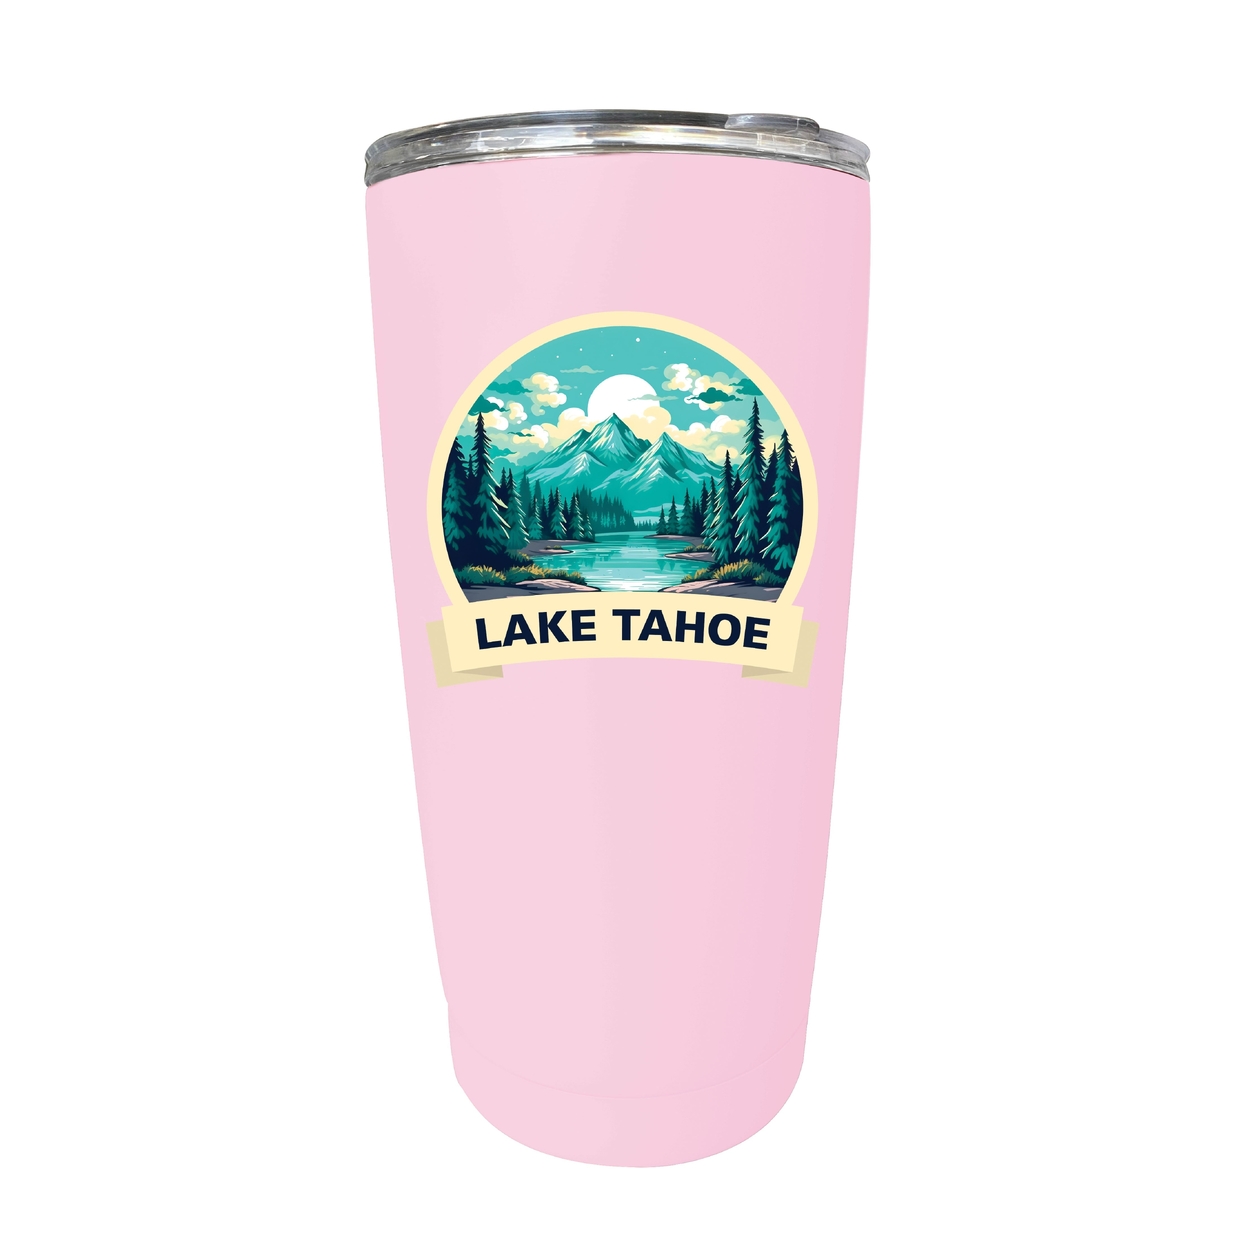 Lake Tahoe California Souvenir 16 Oz Stainless Steel Insulated Tumbler - Pink,,4-Pack